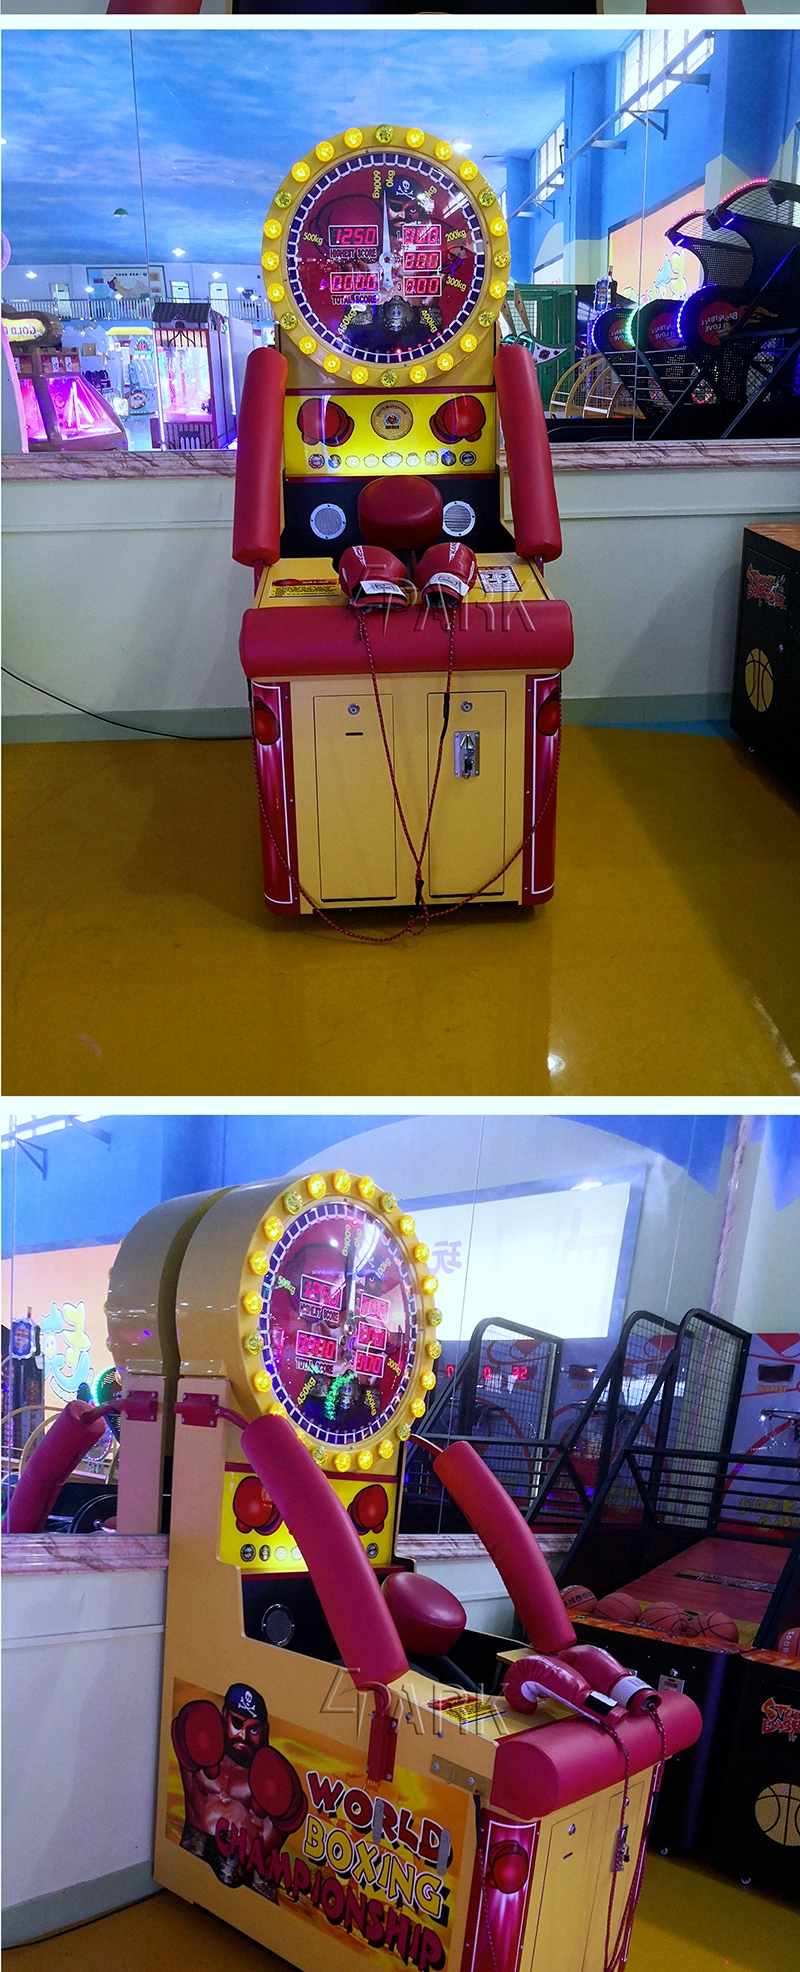 World Boxing Championship Coin Operated Amusement Park Arcade Game Machine